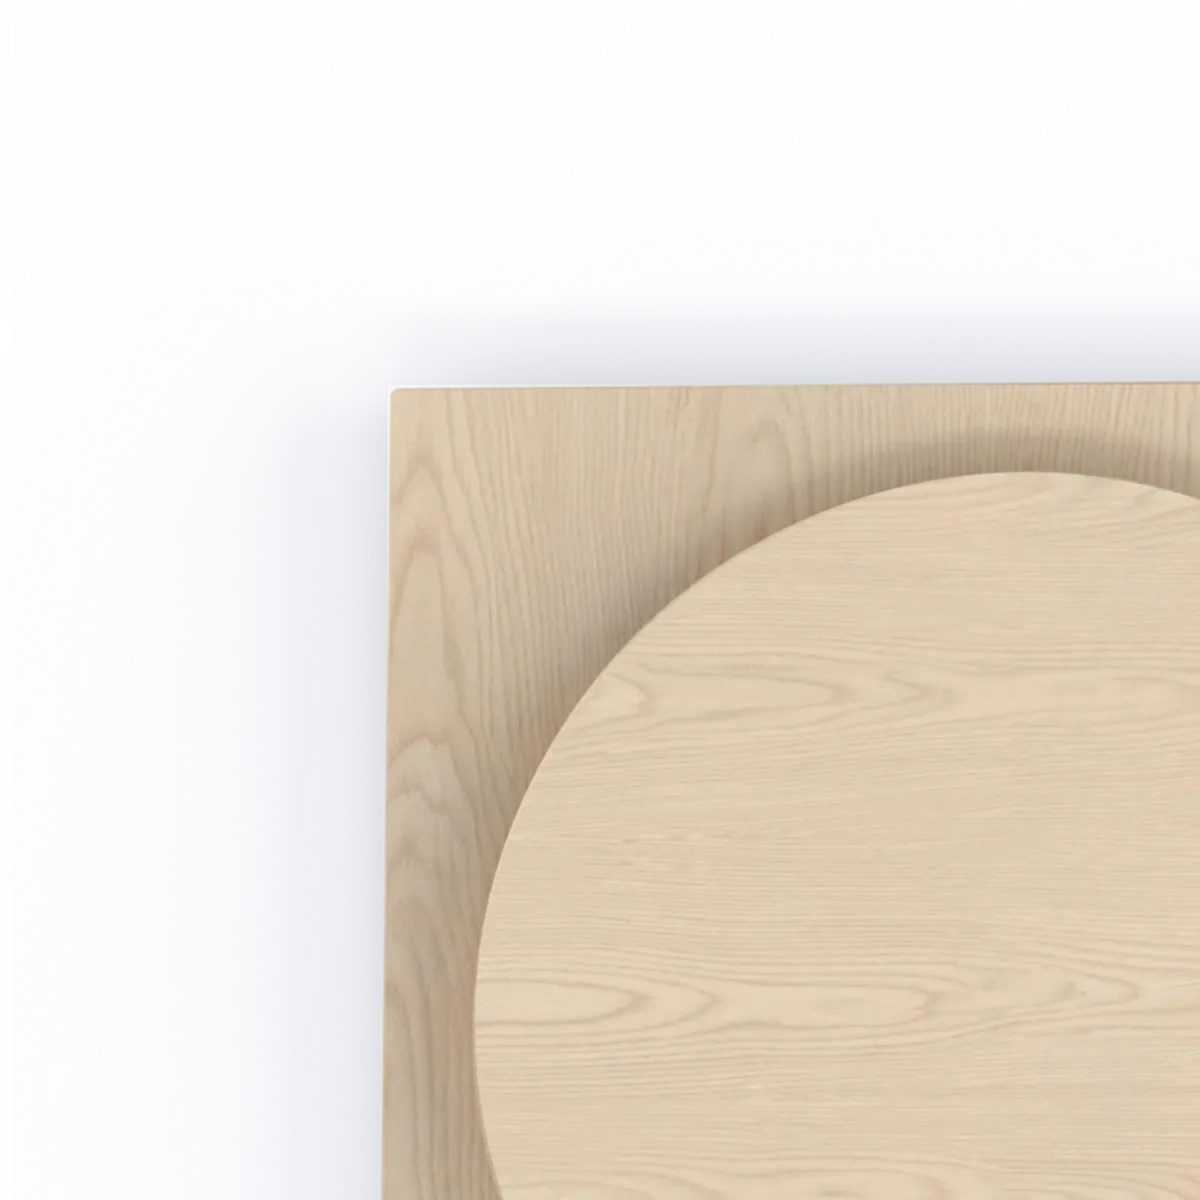 Web Solid Wood Table Top Inside Out Contracts